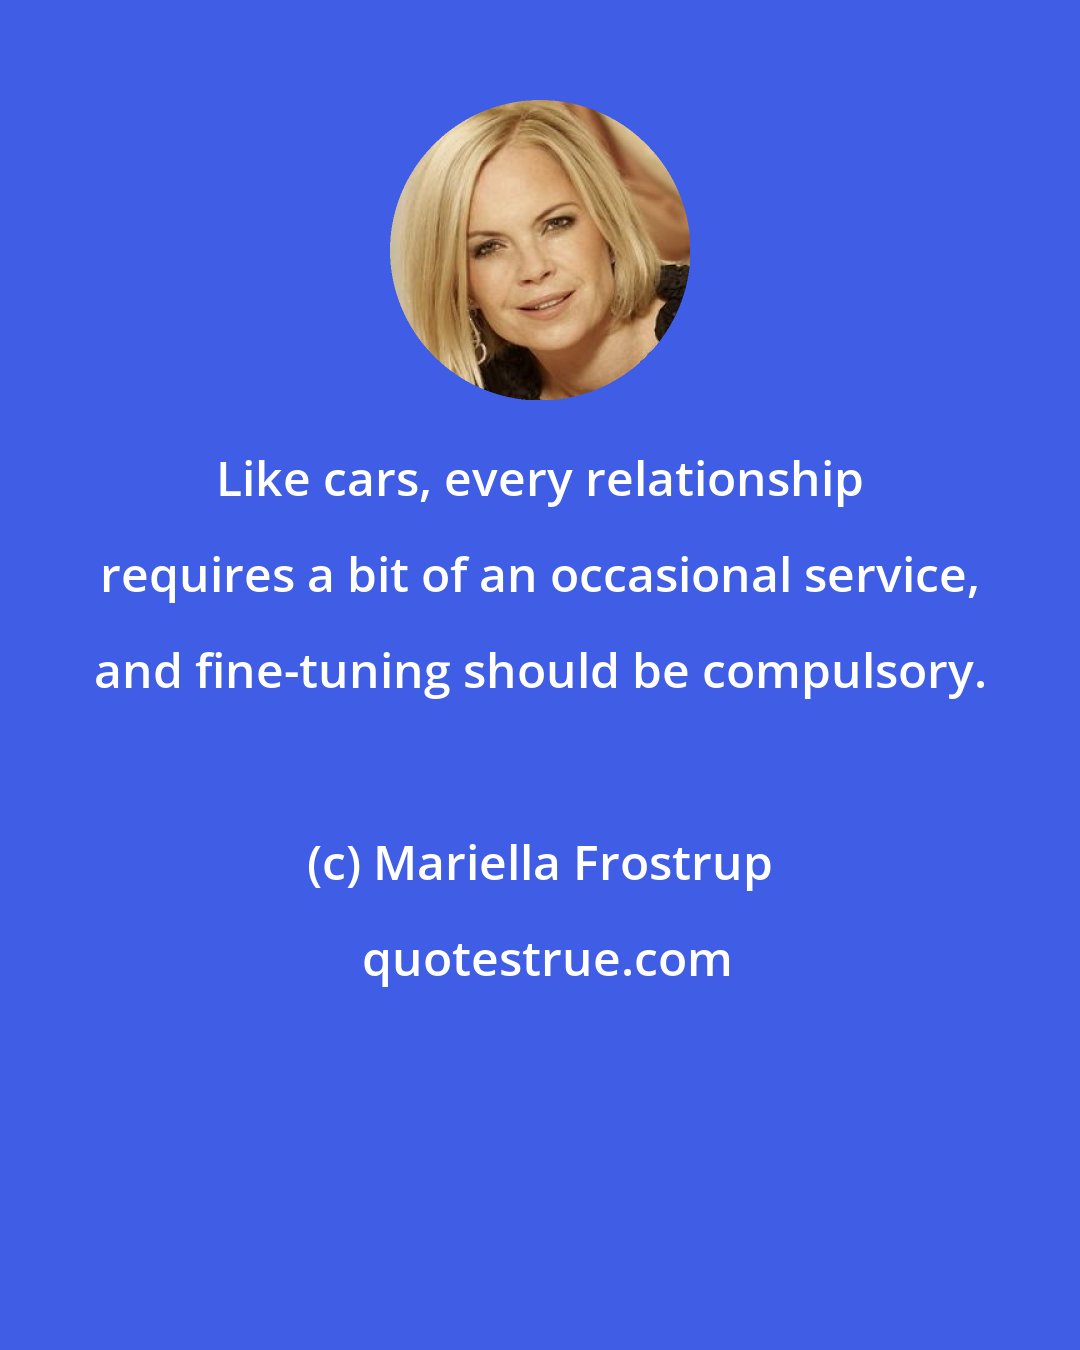 Mariella Frostrup: Like cars, every relationship requires a bit of an occasional service, and fine-tuning should be compulsory.